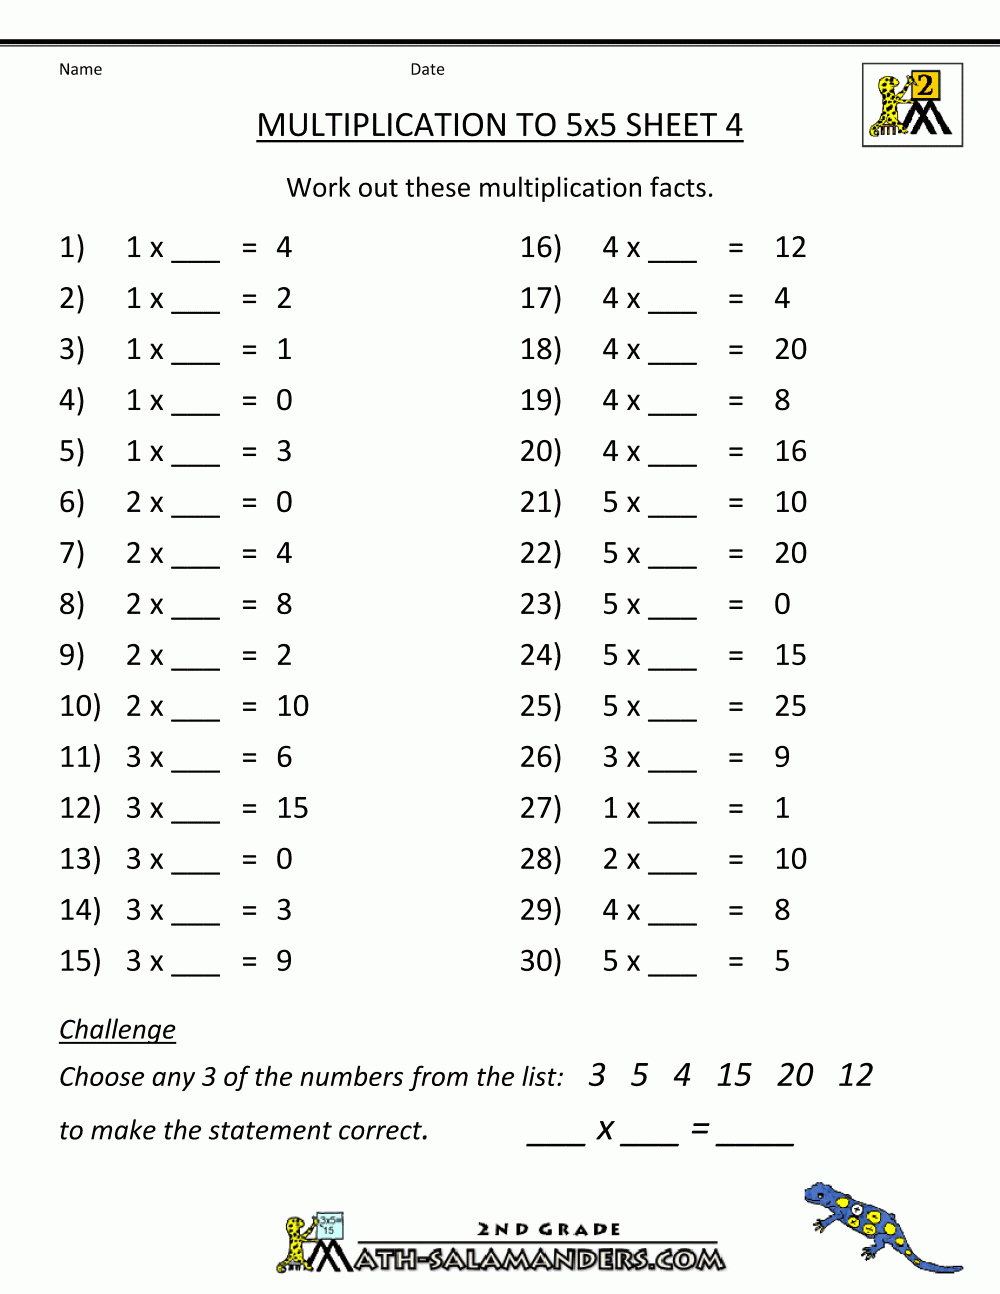 math facts practice worksheets multiplication db excelcom